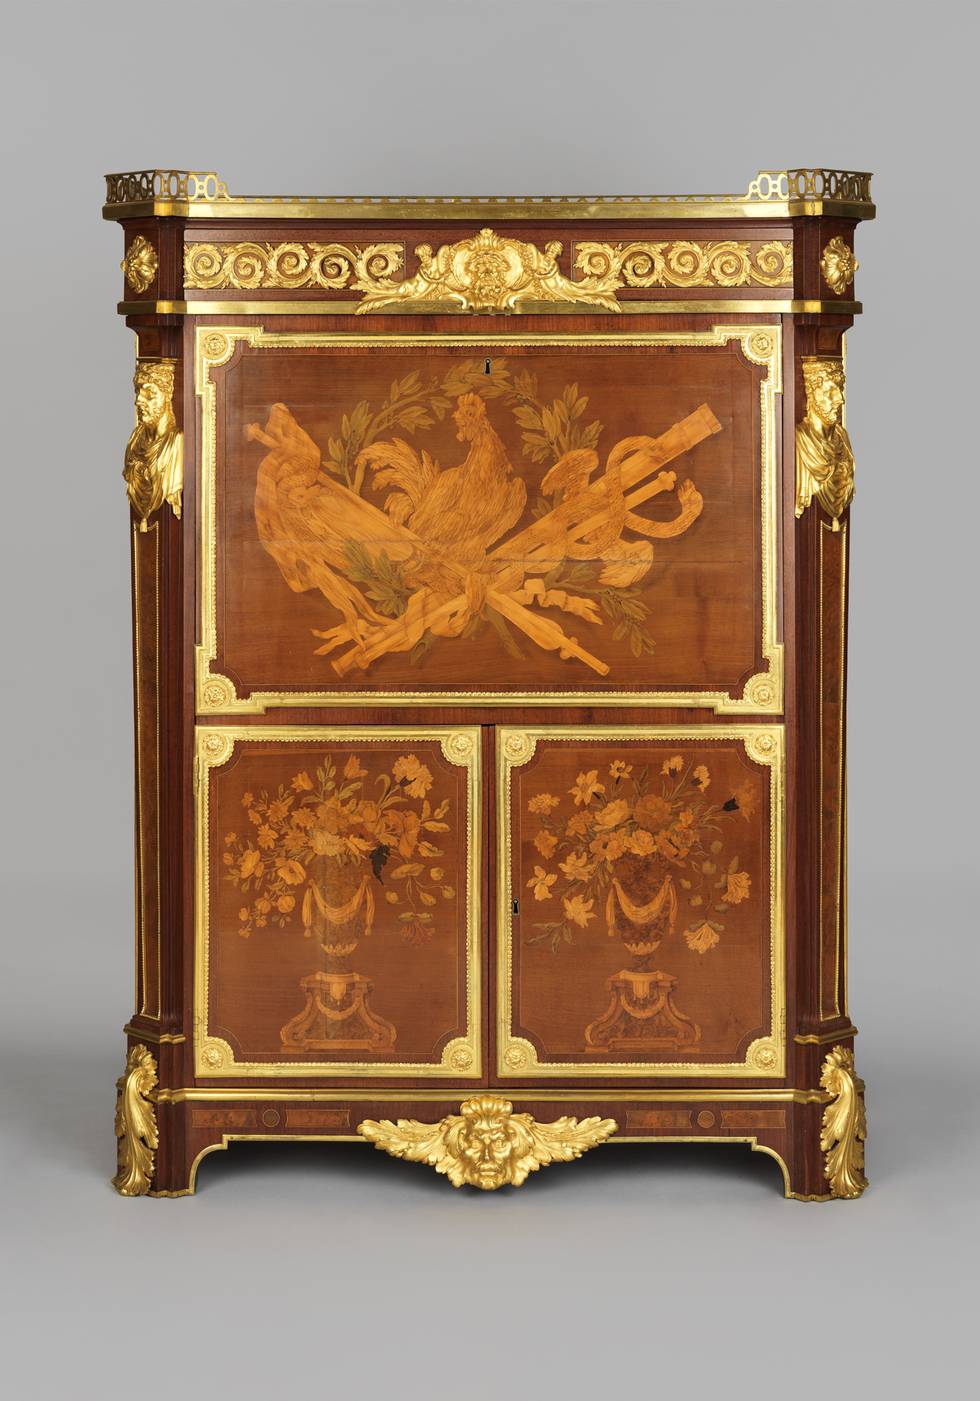 A marquetry fall-front desk